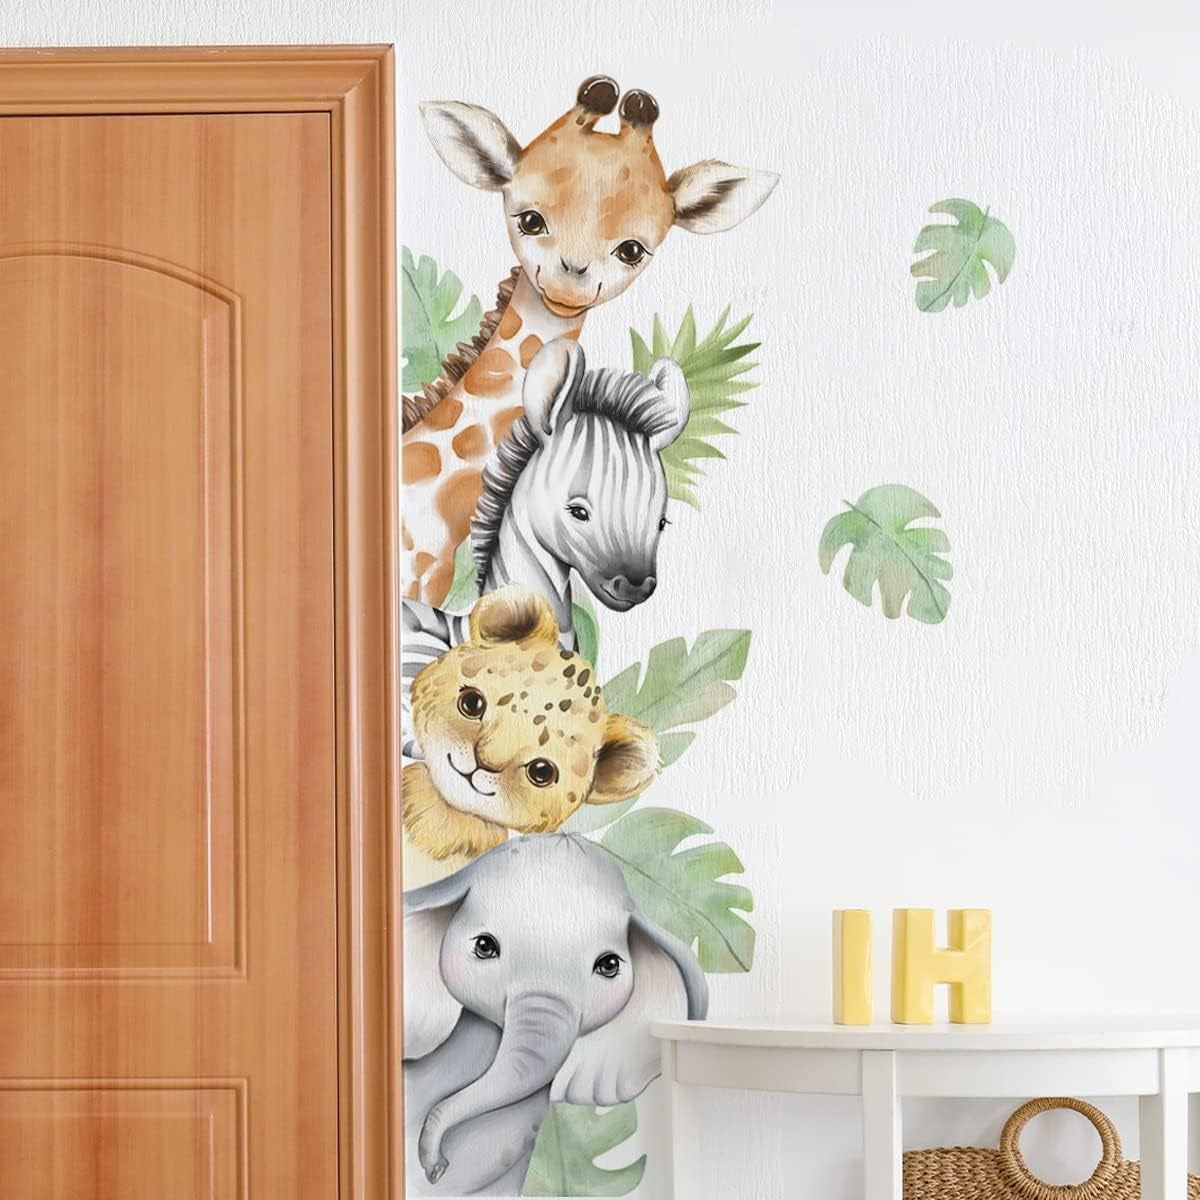 44.88 X 11.75 Inch Watercolor Jungle Animal Wall Decals Forest Animal Wall Sticker Elephant Lion Monkey Wall Decals for Baby Nursery Playroom Bedroom Classroom Kindergarten Wall Decor